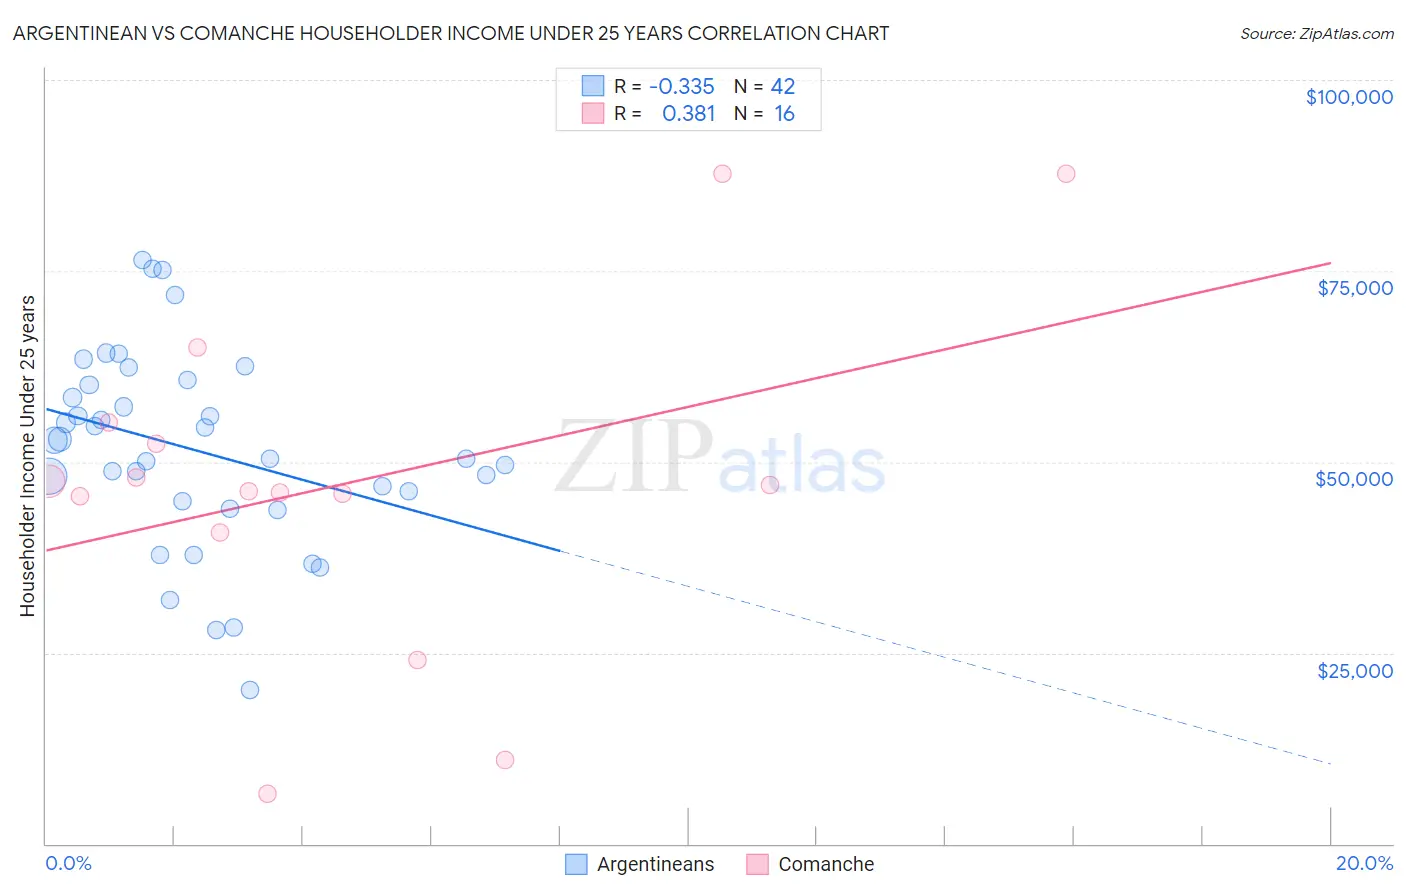 Argentinean vs Comanche Householder Income Under 25 years